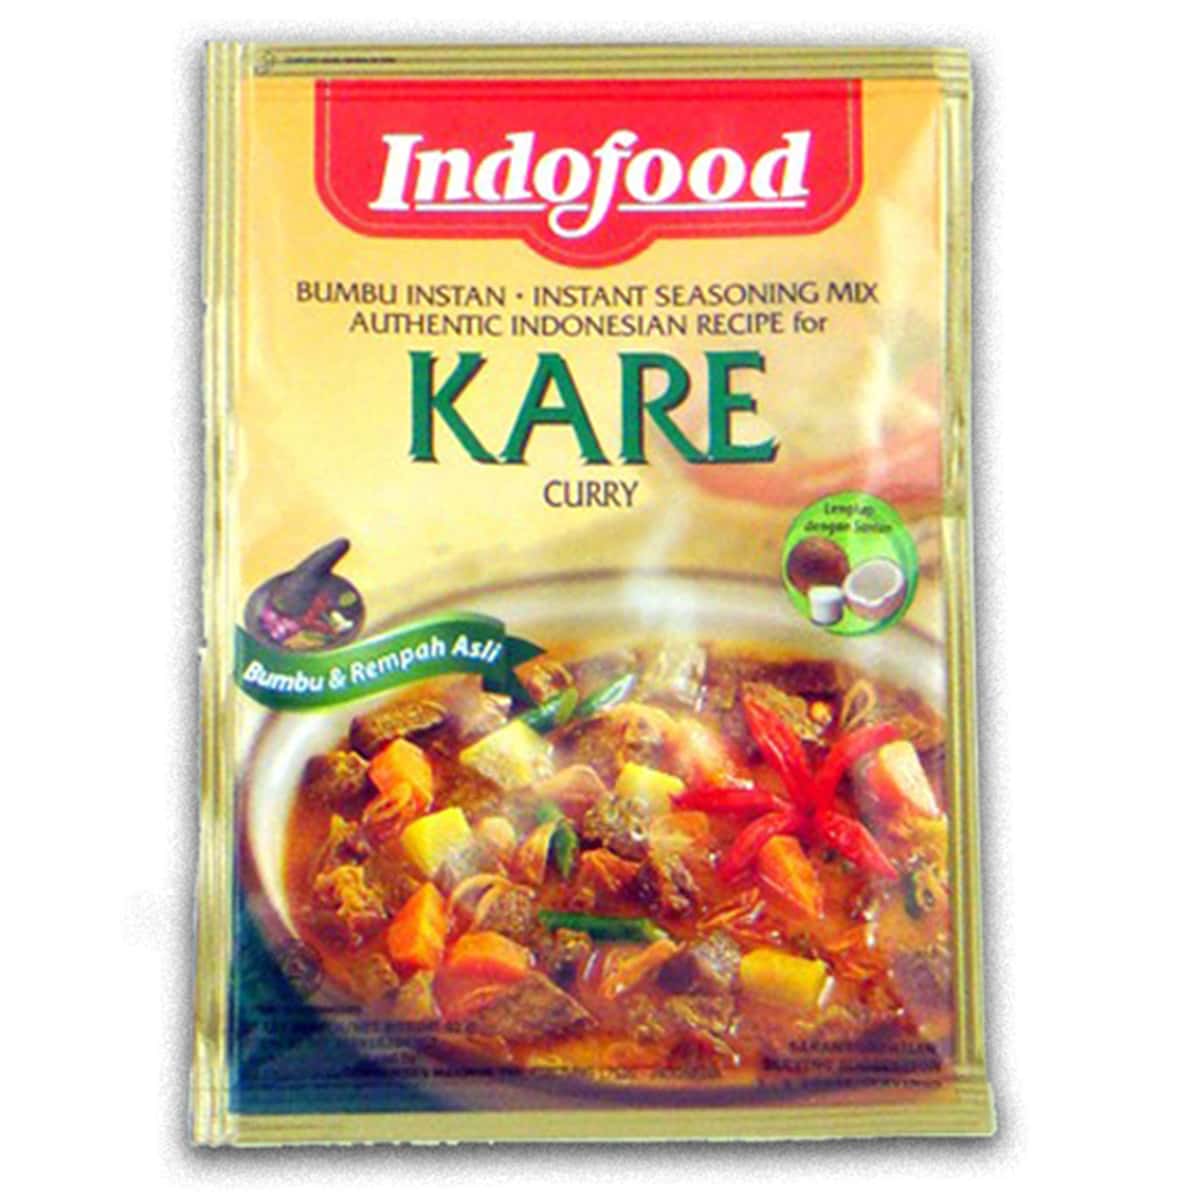 Buy Indofood Kare (Curry) - 45 gm